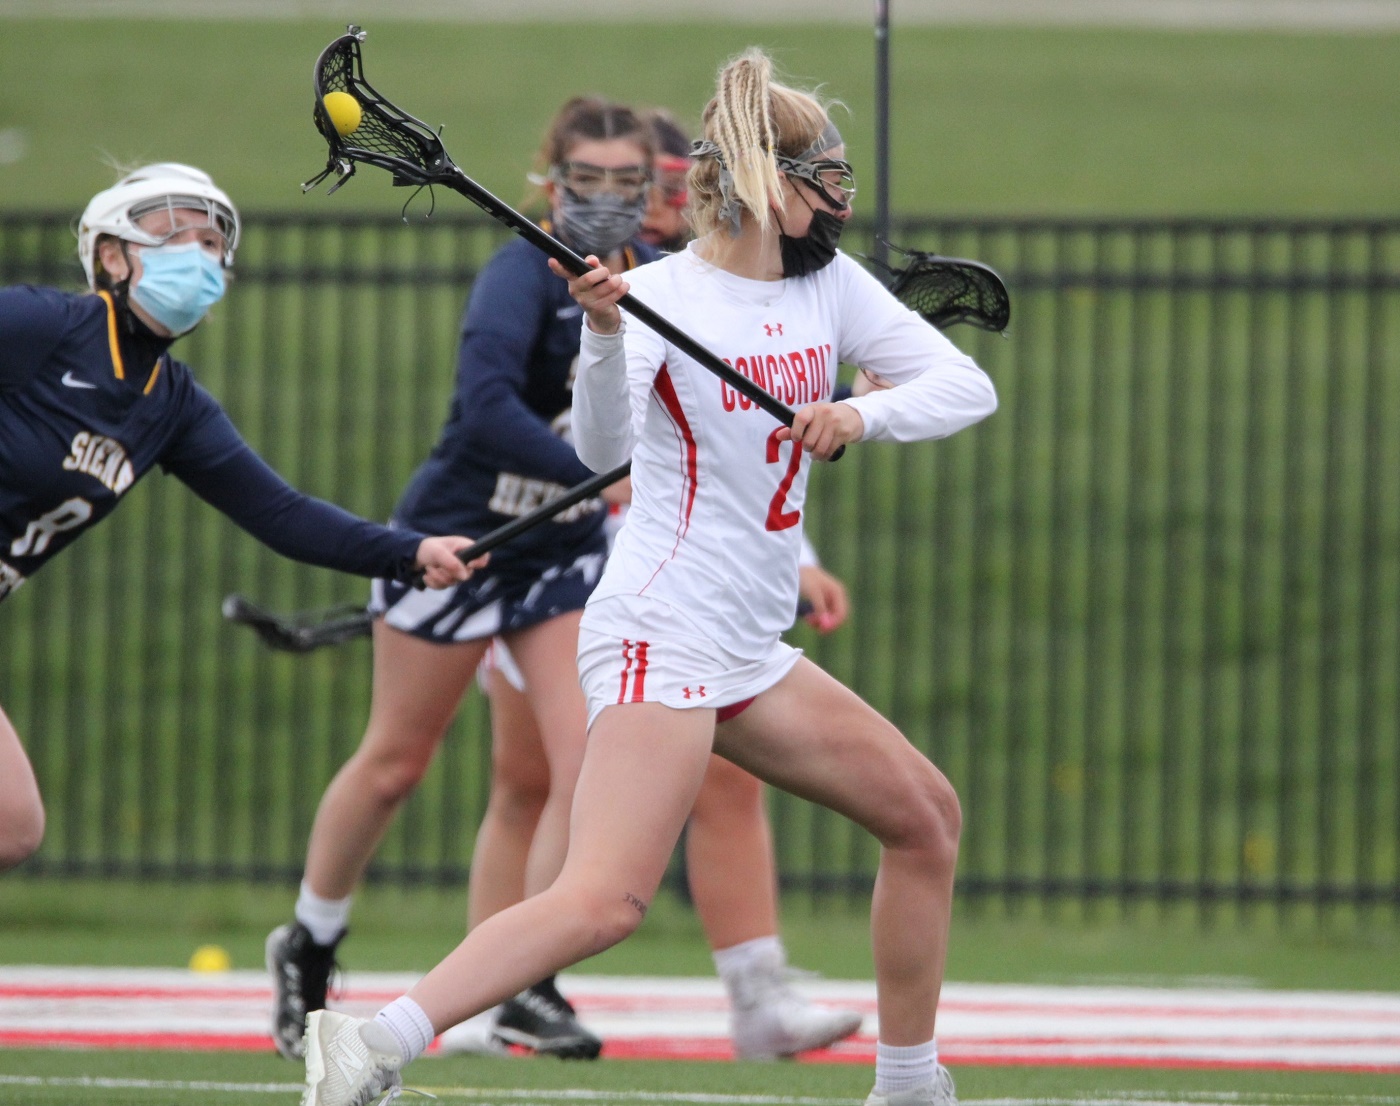 Cardinals rally falls short 16-11 to Siena Heights in WHAC semifinals